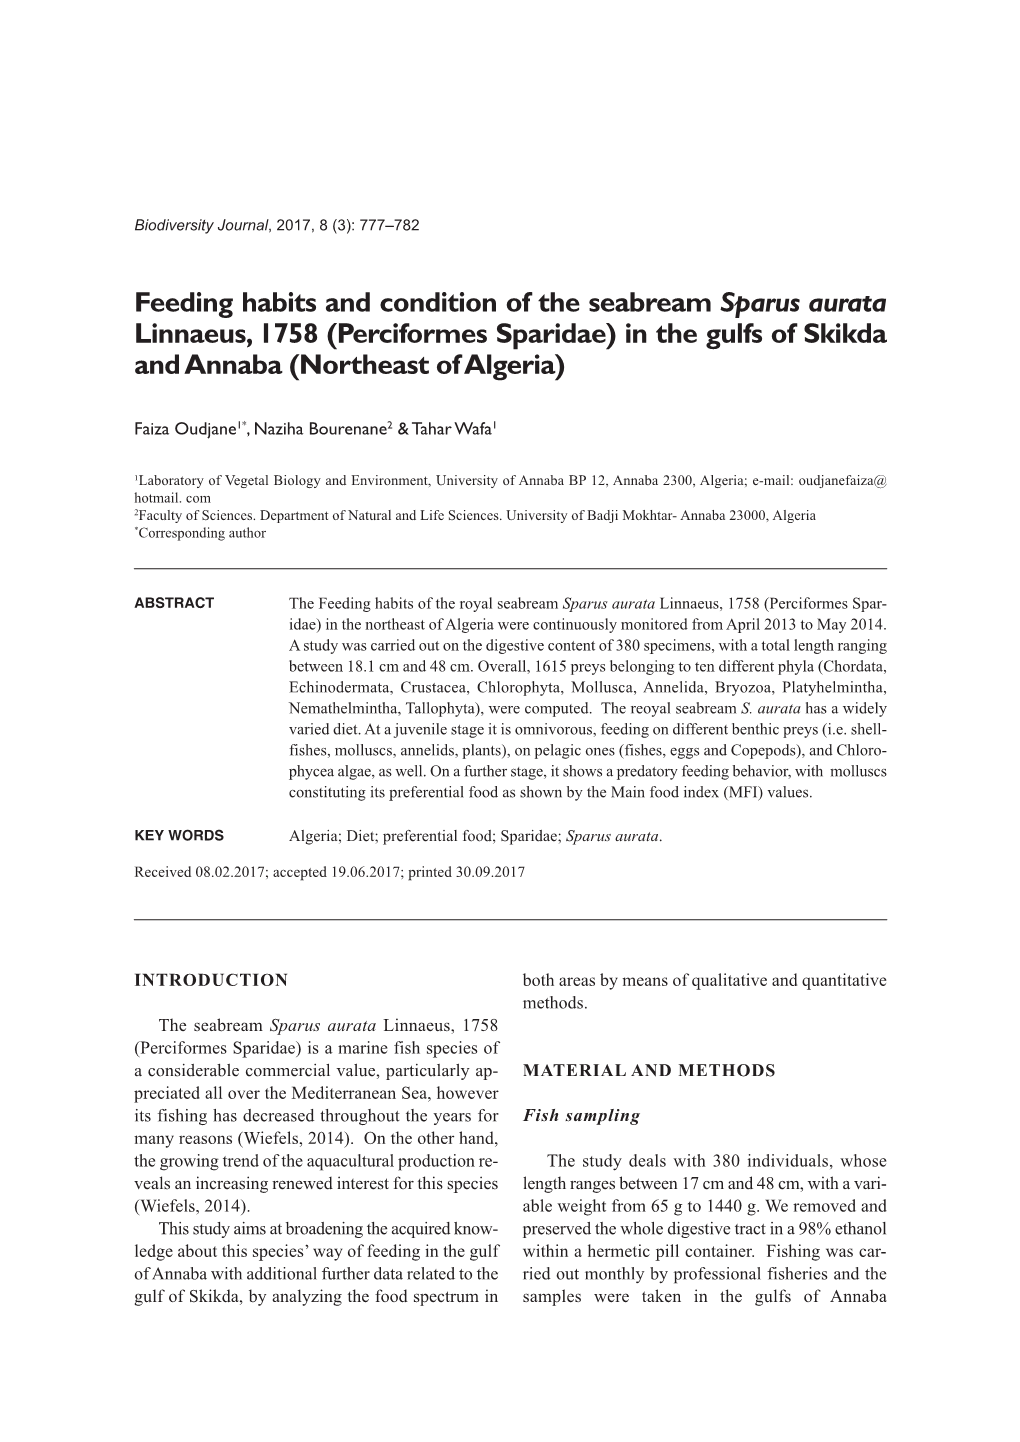 Feeding Habits and Condition of the Seabream Sparus Aurata Linnaeus, 1758 (Perciformes Sparidae) in the Gulfs of Skikda and Annaba (Northeast of Algeria)